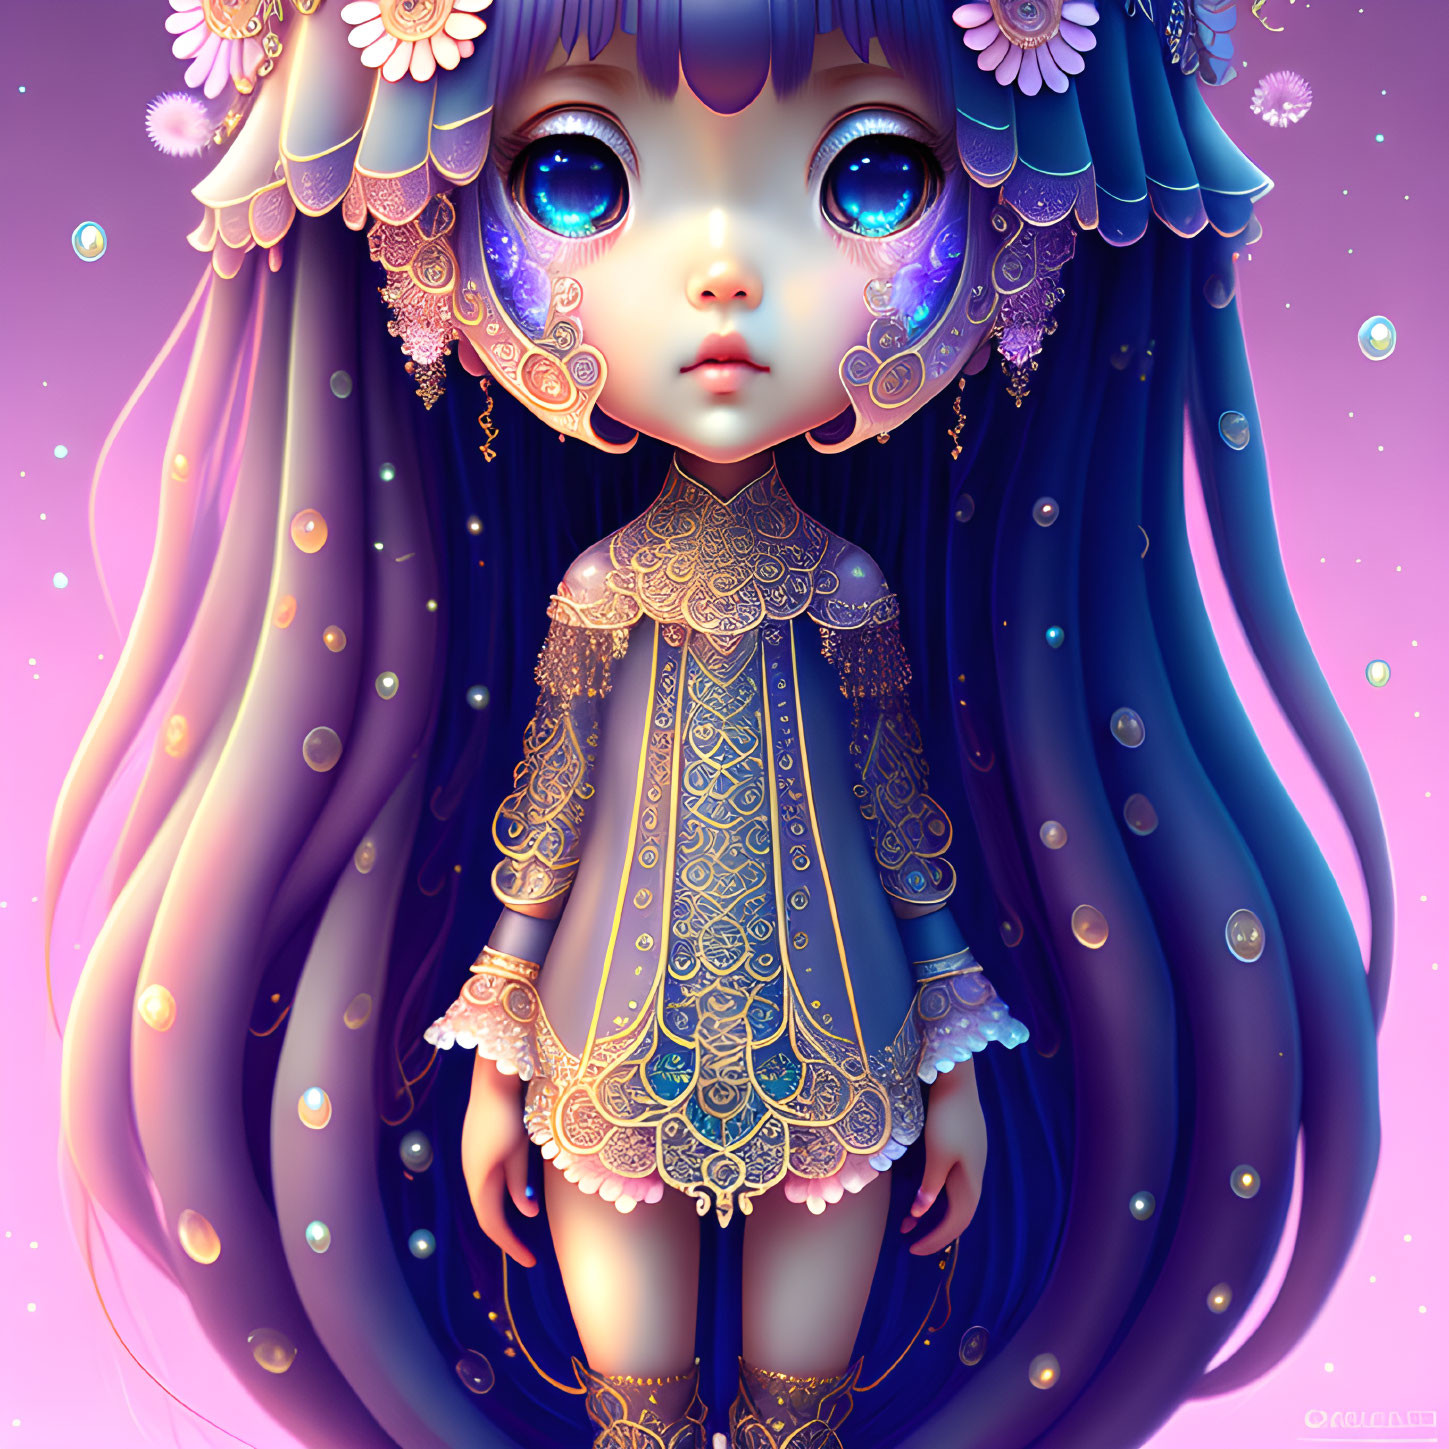 Stylized girl with blue eyes, dark hair, floral crown, and celestial dress.